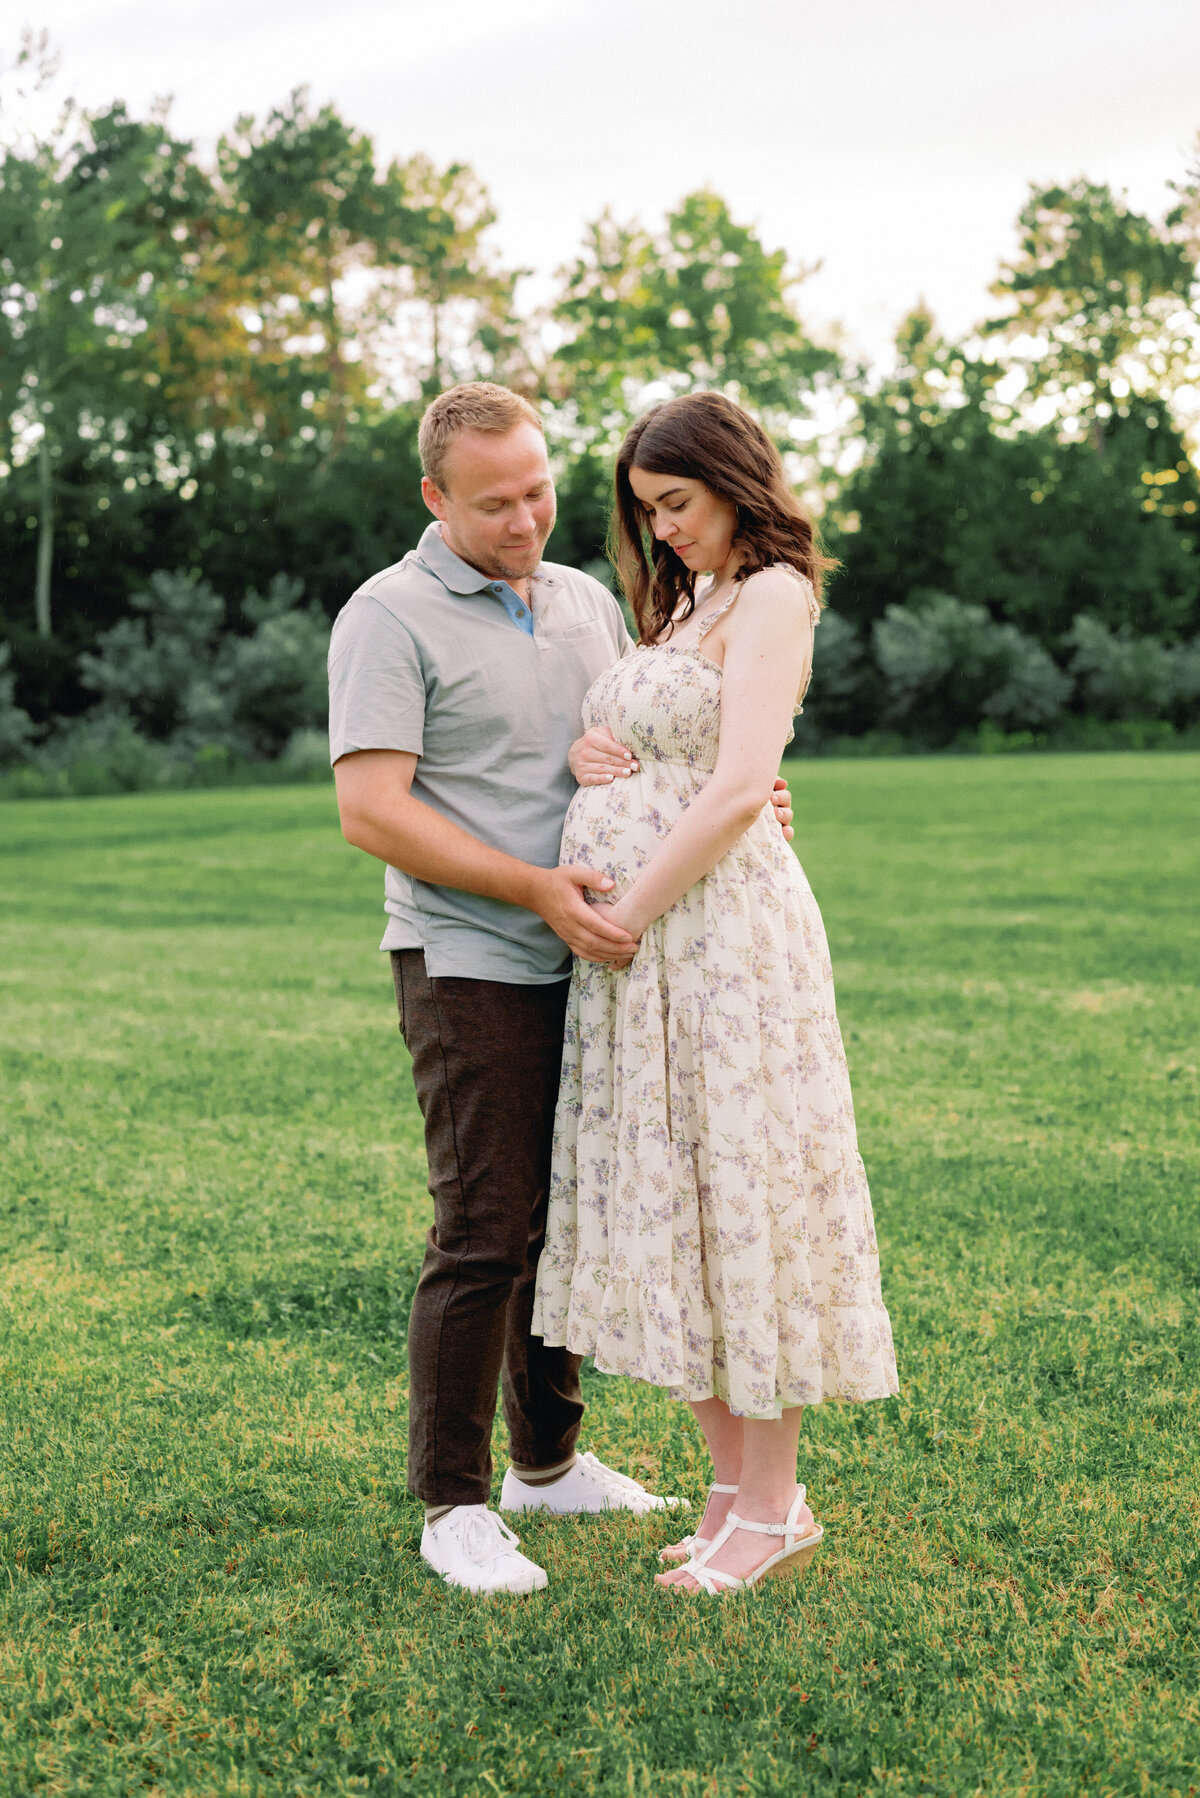 Father looking down at baby bump for mother in floral dress